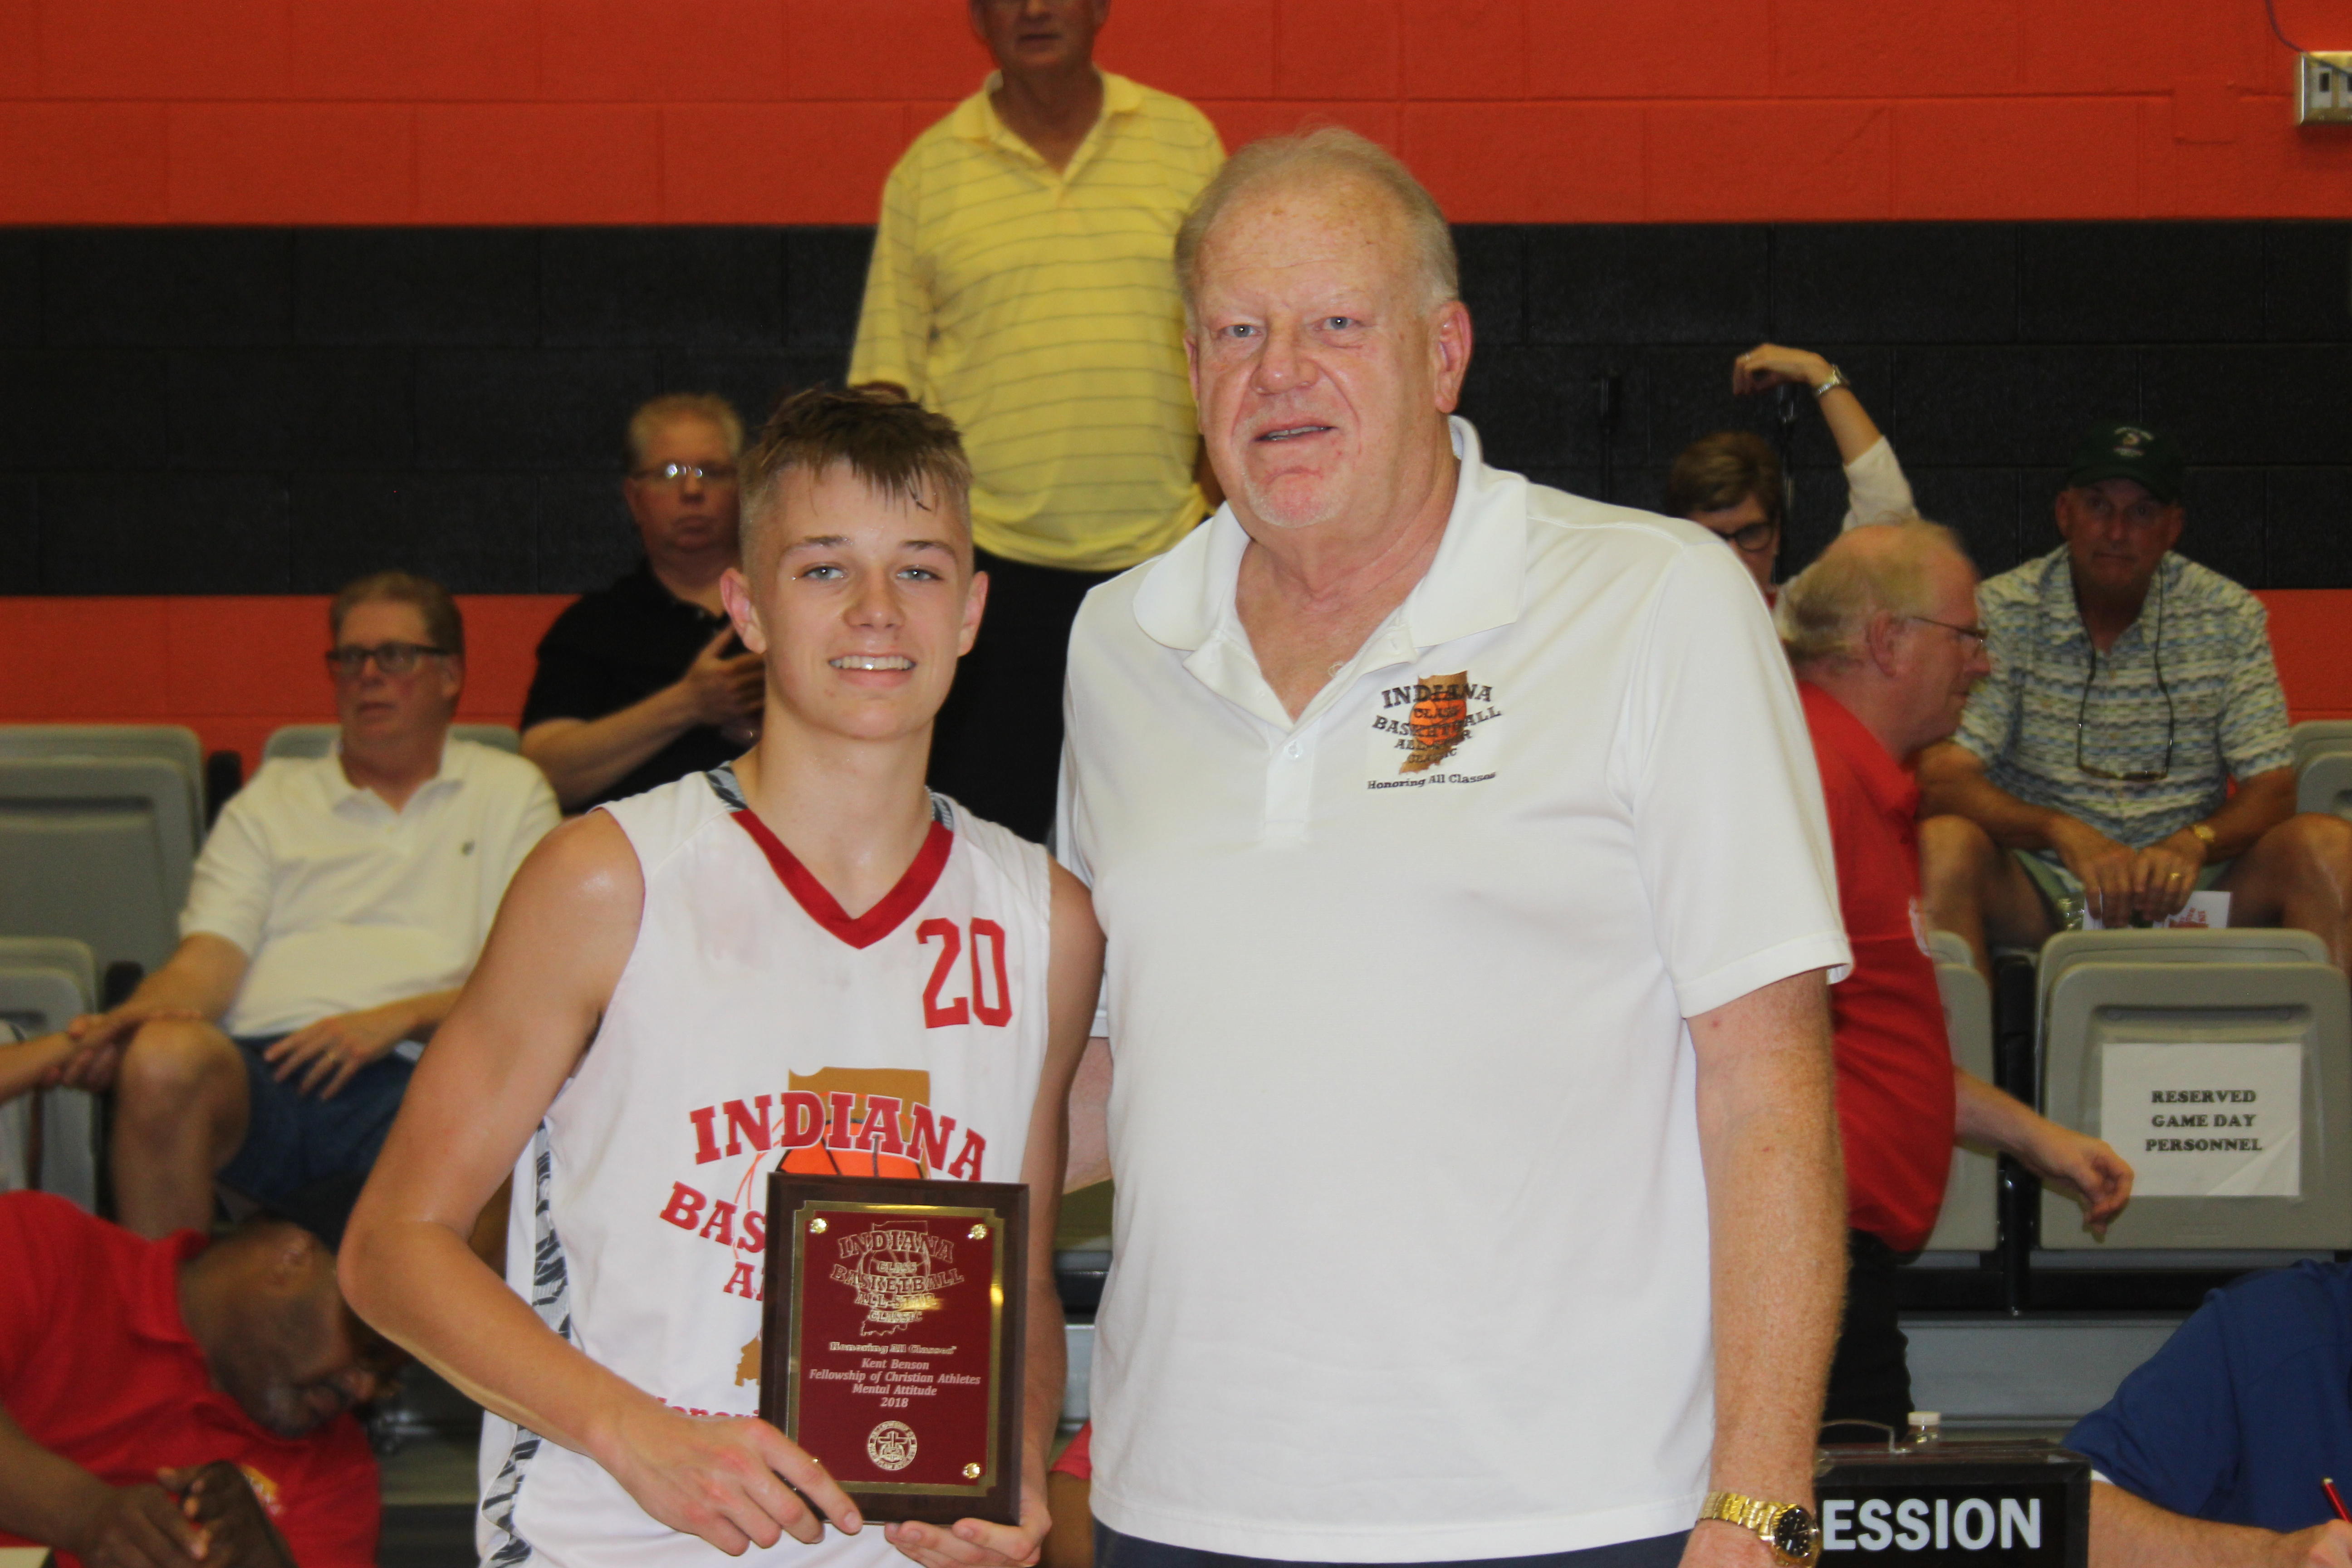 Clay Hilliard received the Kent Benson Fellowship of Christian Athletes Mental Attitude Award at the Indiana Classic All Star Game on June 16. Hilliard scored 8 points in the game. He is pictured with Kent Benson.